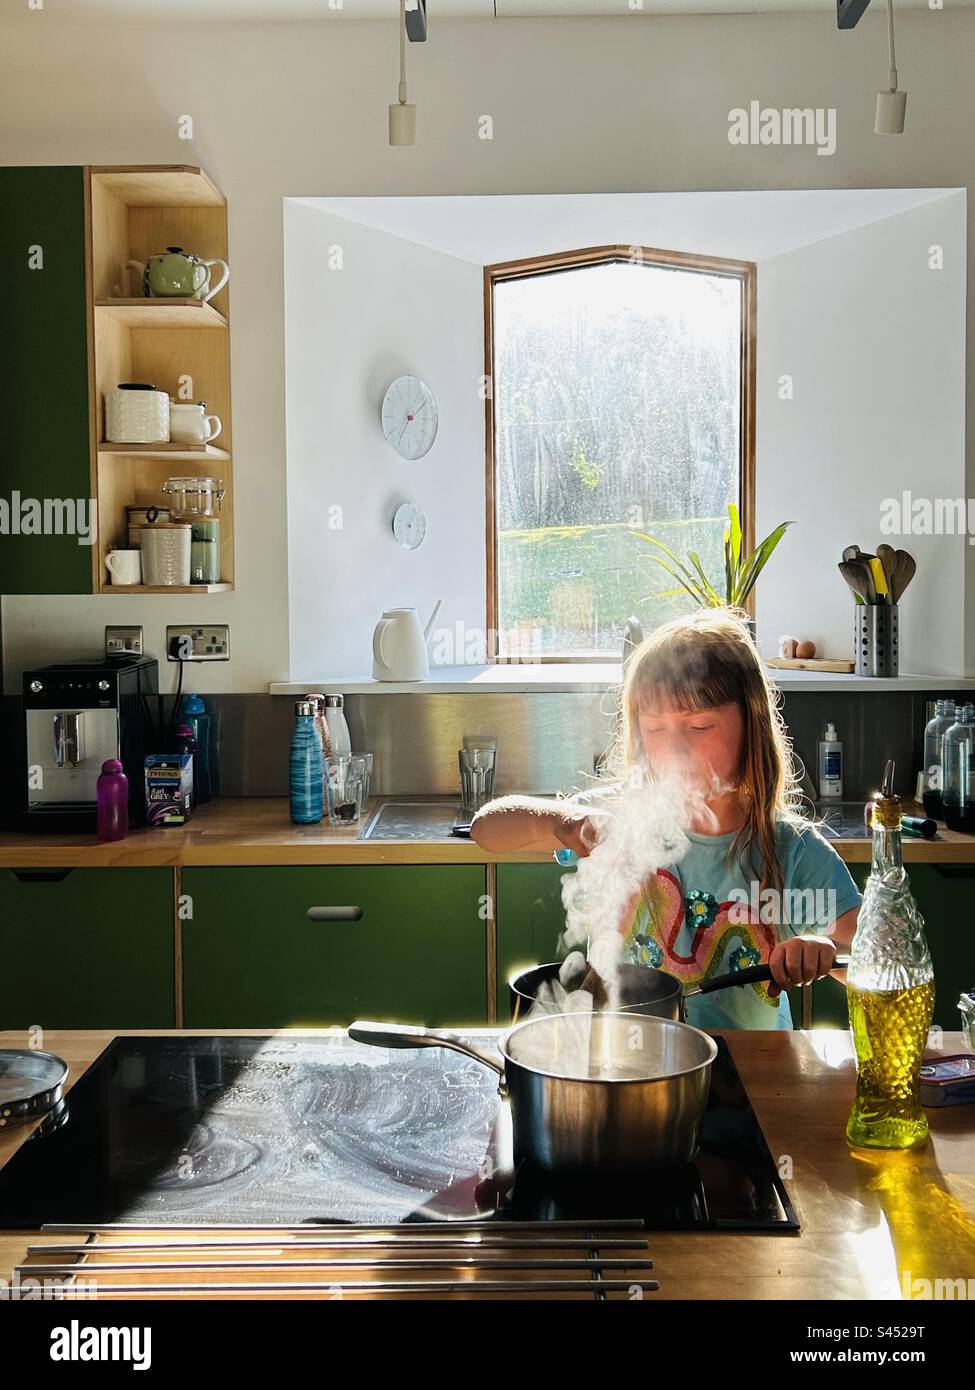 Girl cooking on a convection hob, stirring a pan with steam coming out. Window behind in an open plan kitchen Stock Photo